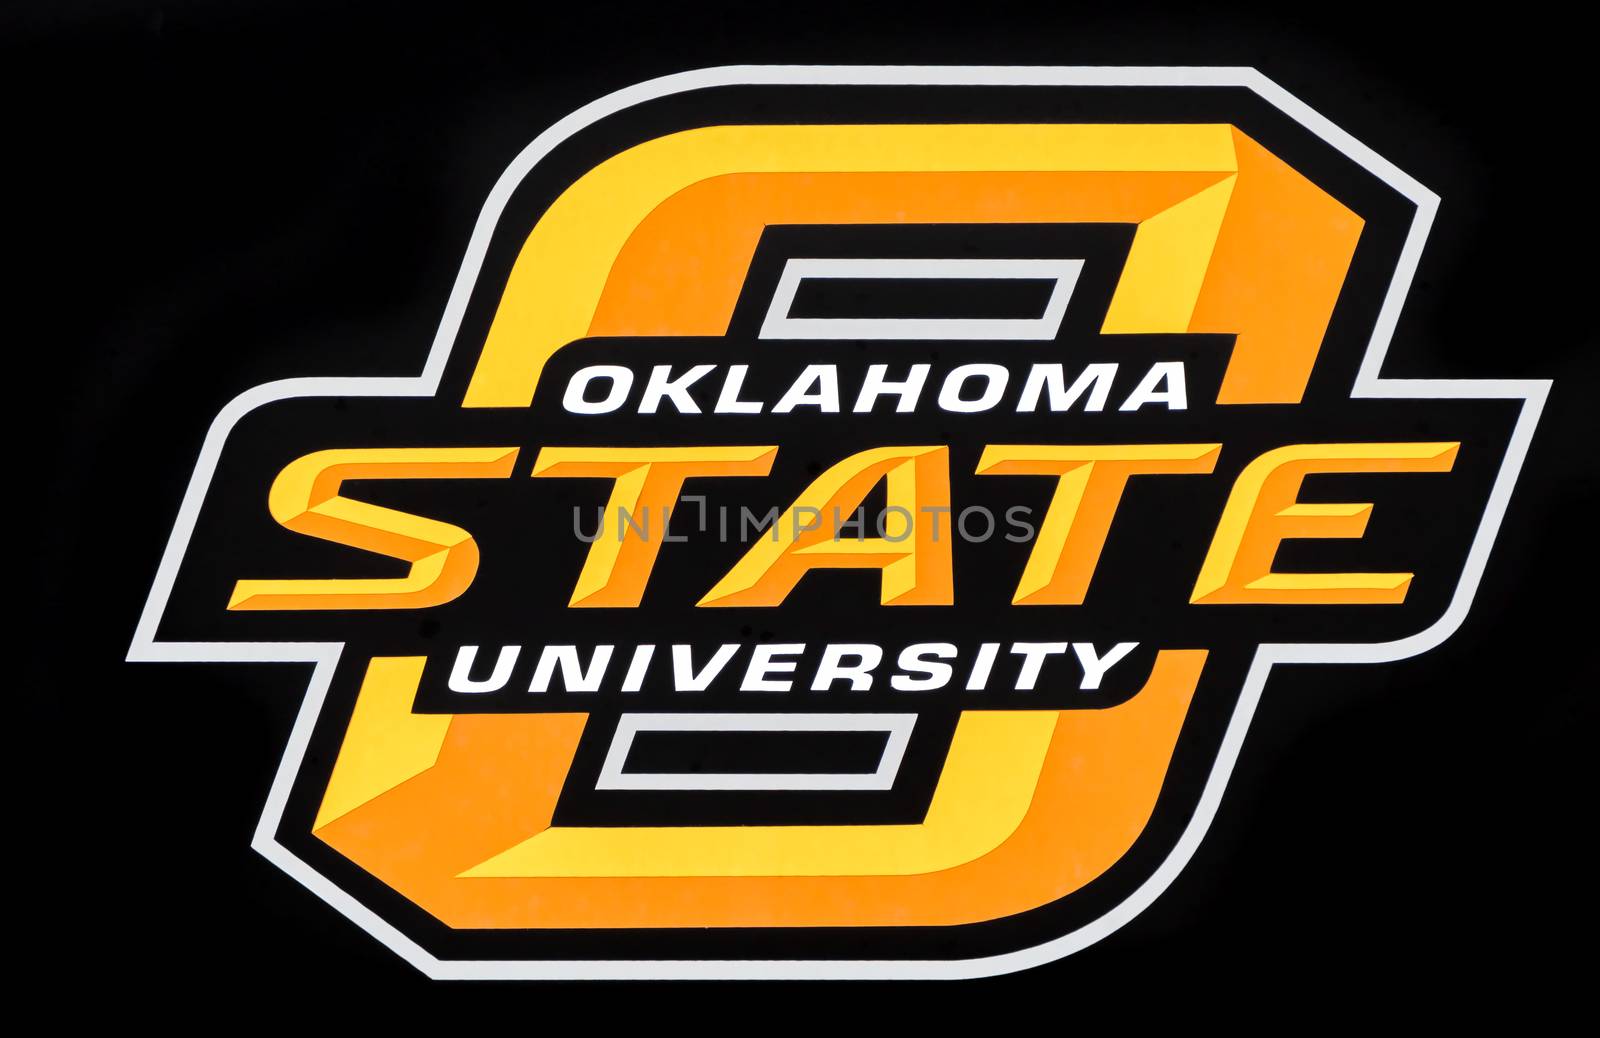 STILLWATER, OK/USA - MAY 20, 2016: Oklahoma State University logo and seal on the campus of Oklahoma State University.